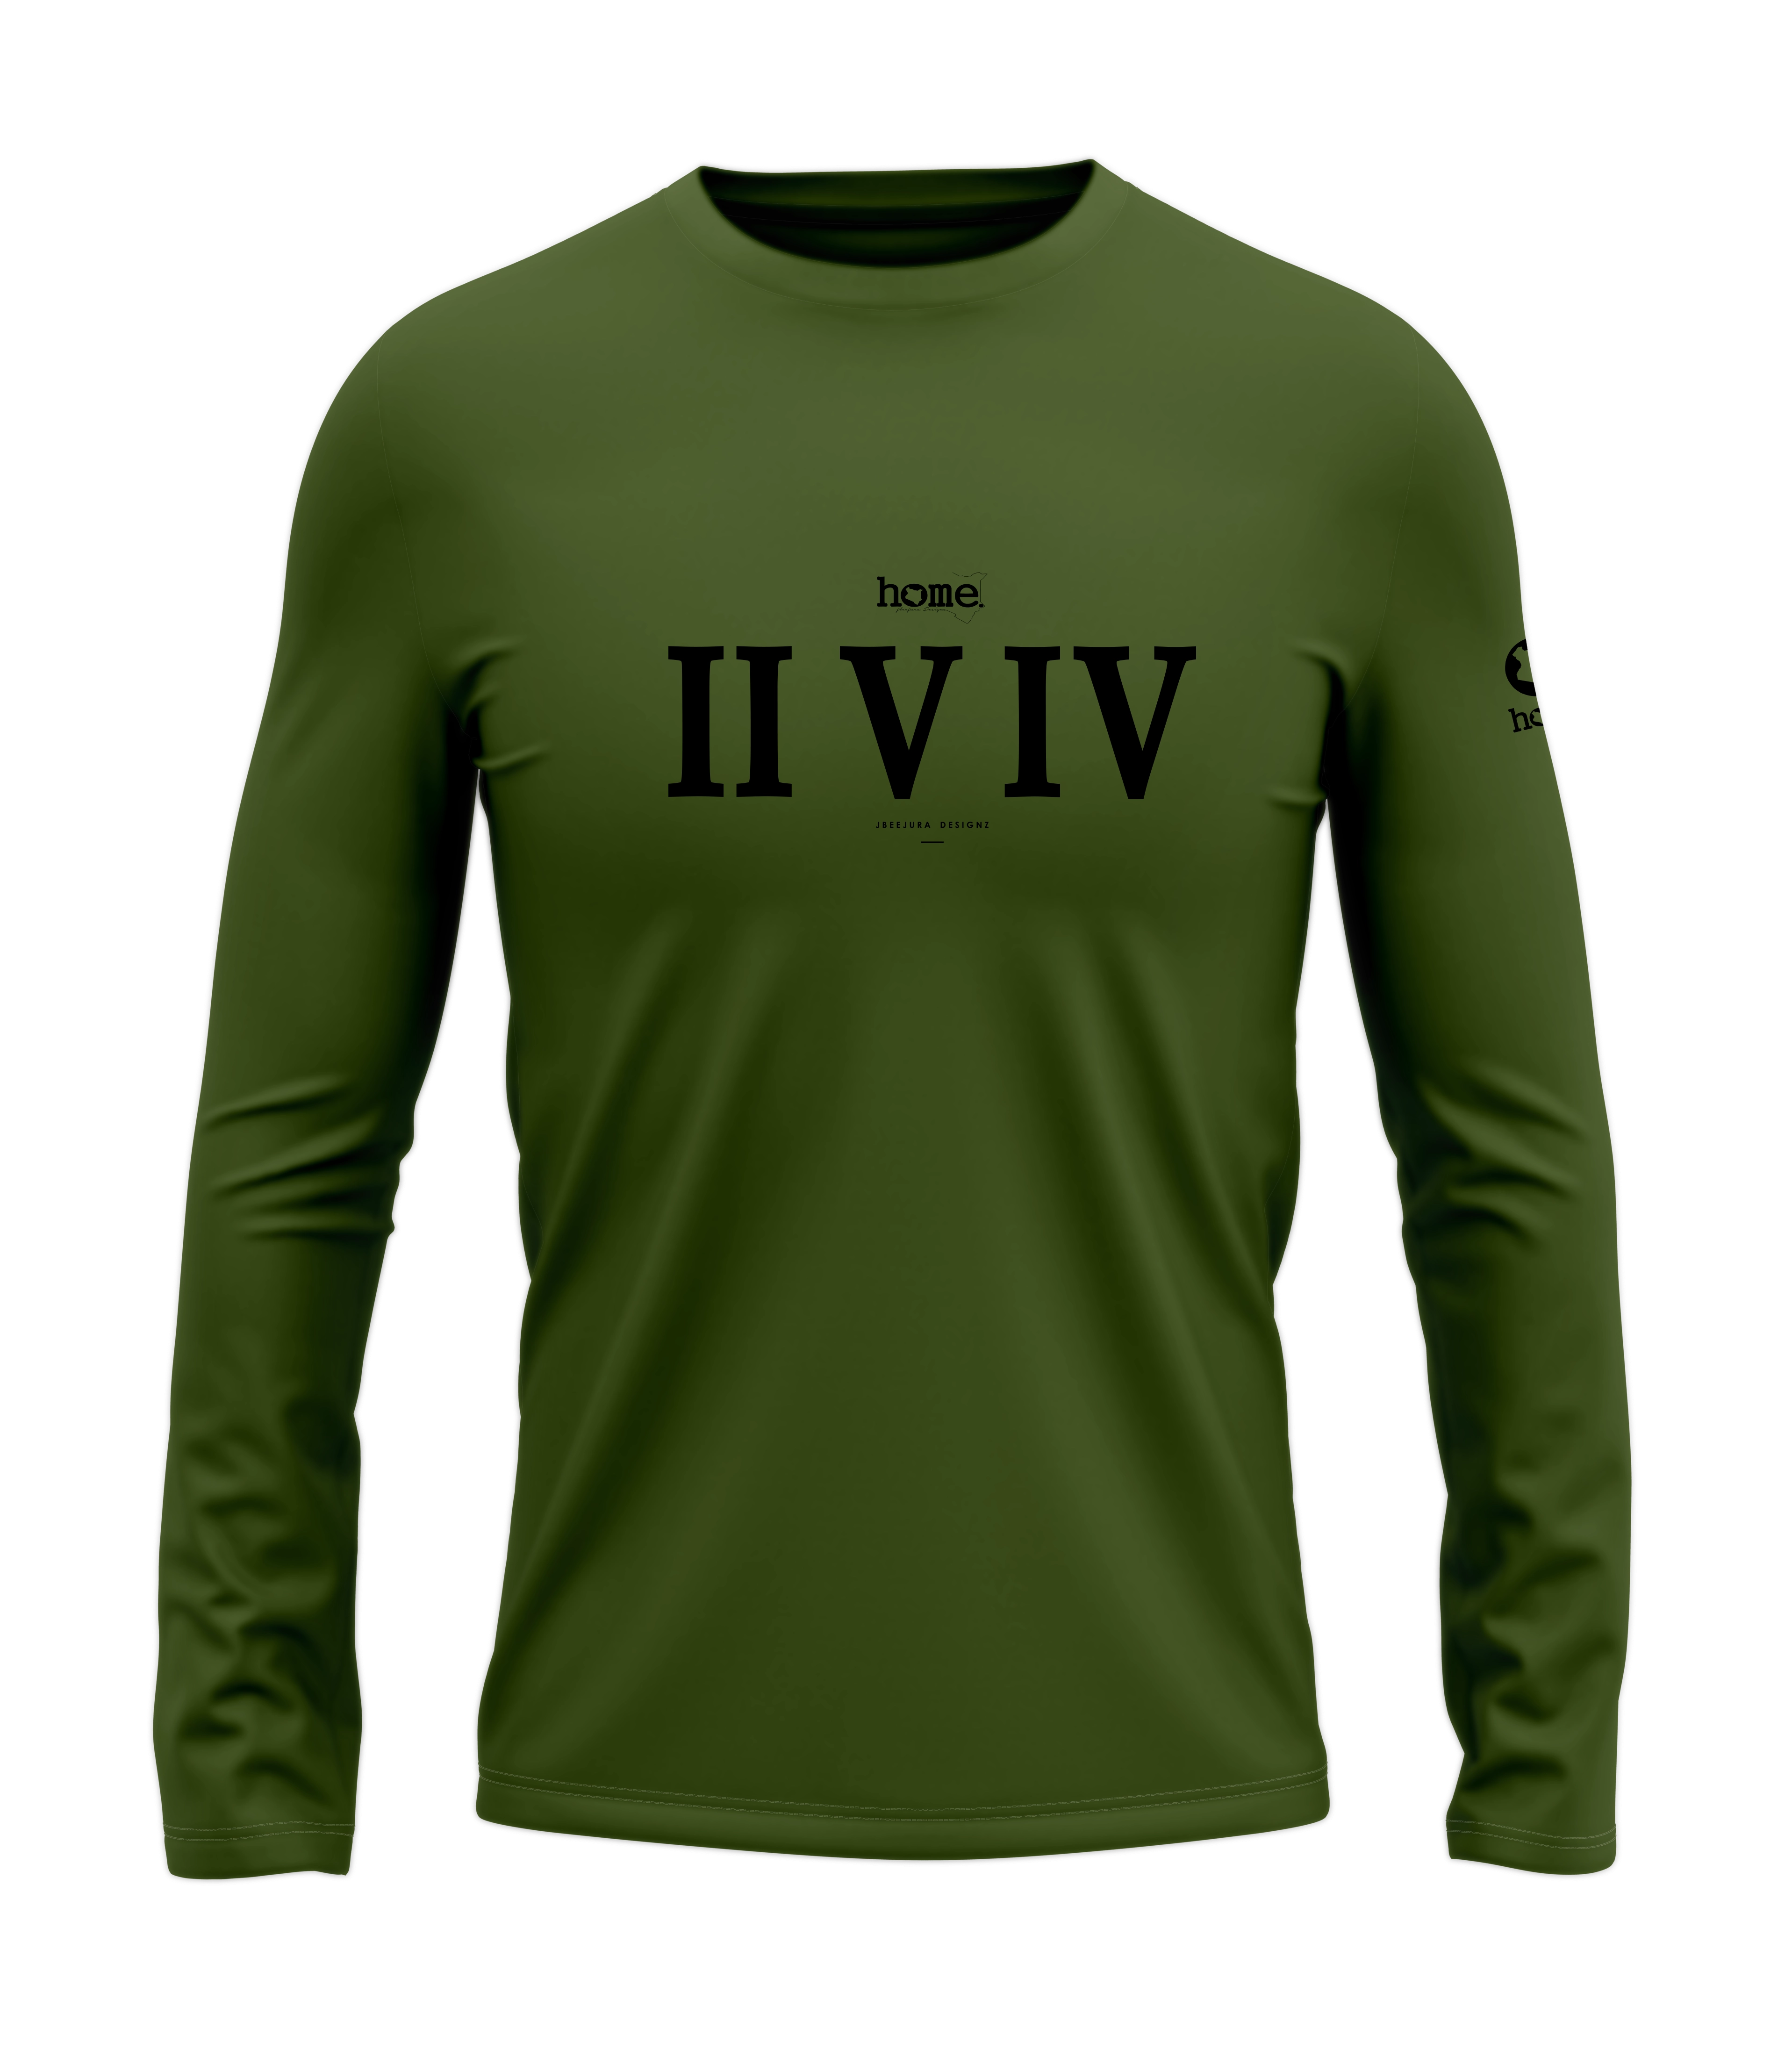 home_254 LONG-SLEEVED JUNGLE GREEN T-SHIRT WITH A BLACK ROMAN NUMERALS PRINT – COTTON PLUS FABRIC